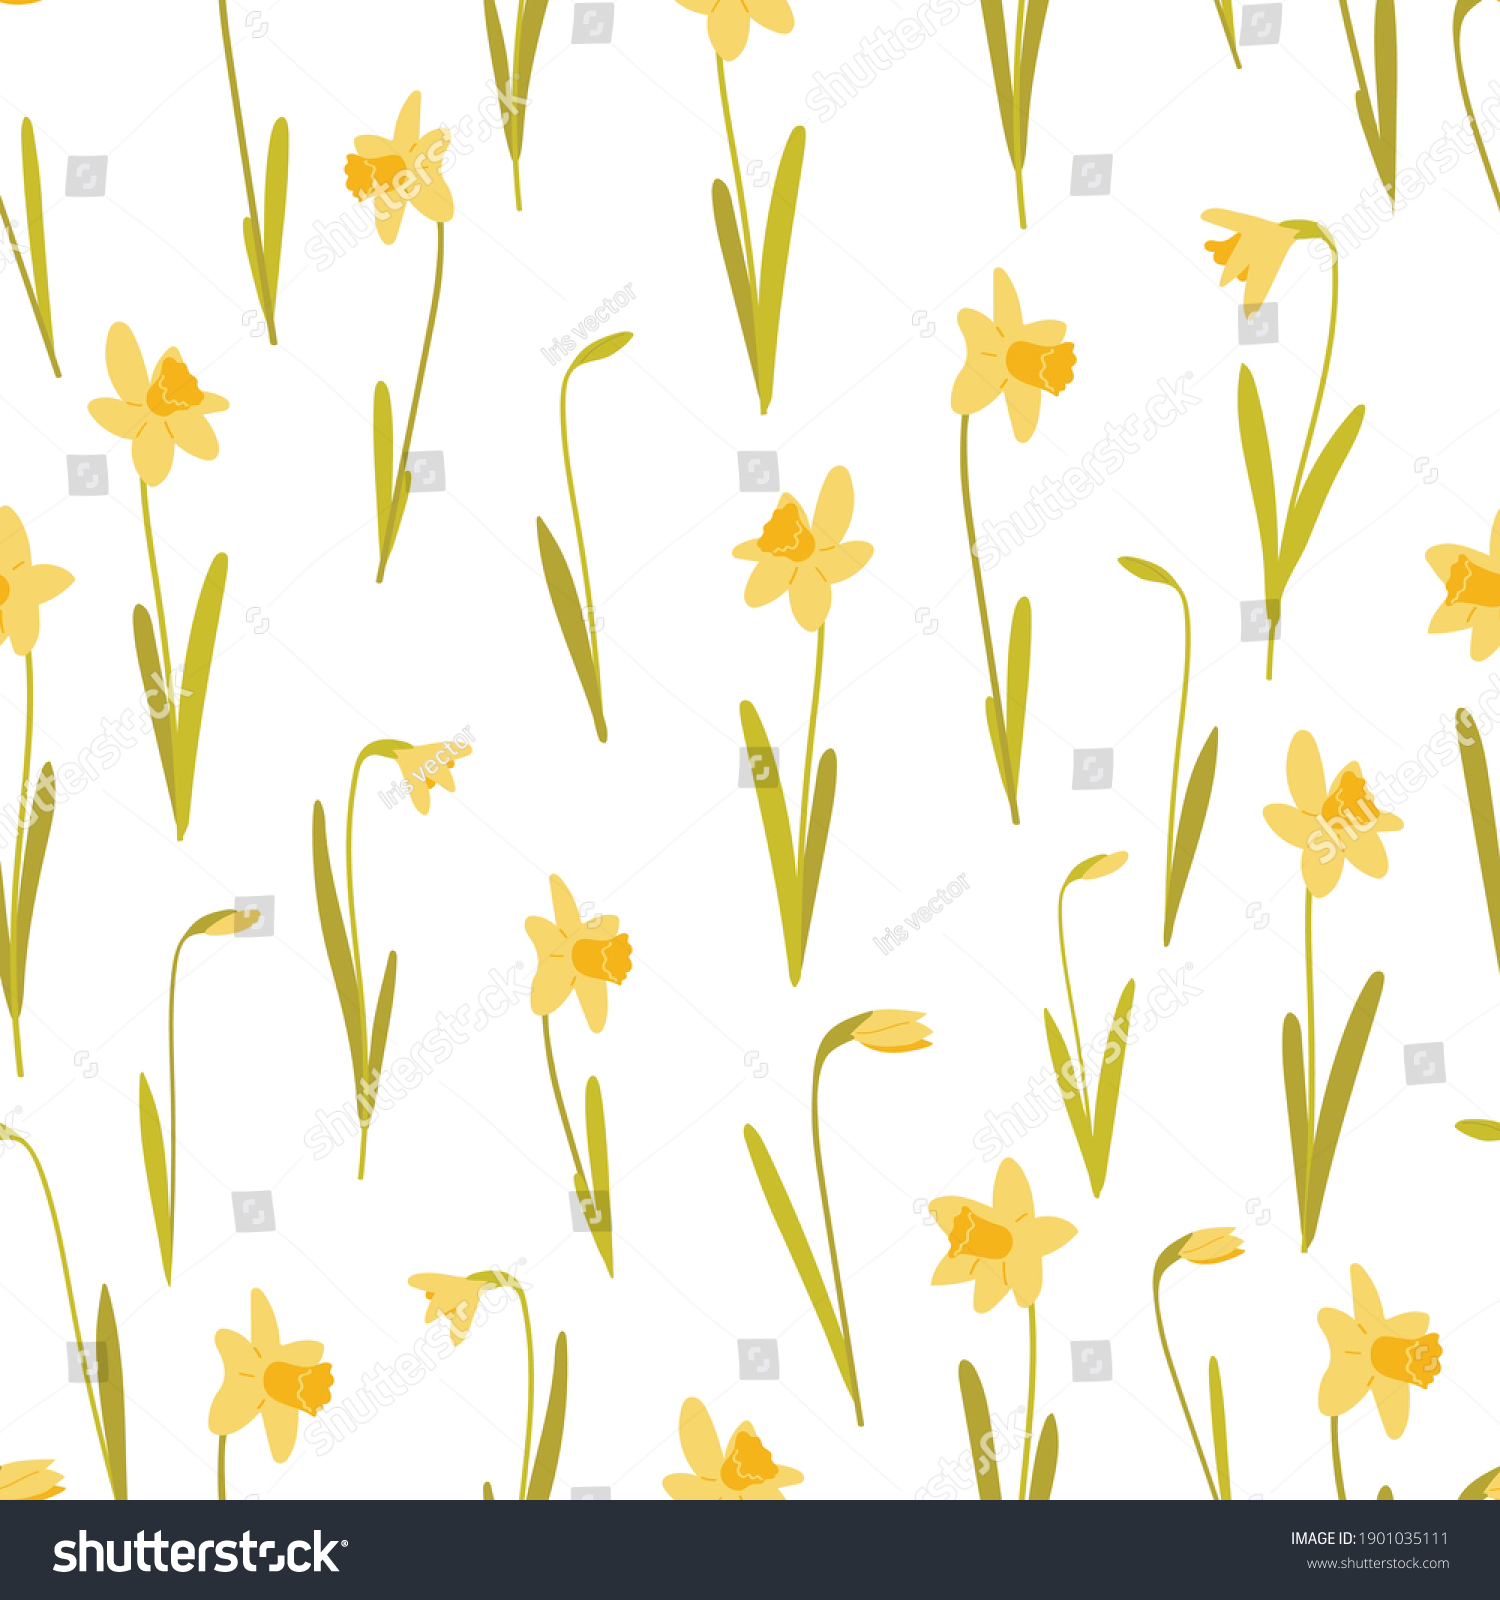 SVG of Yellow daffodils seamless pattern on white background. Beautiful spring flowers. Use for textile, postcards,wallpaper, wrapping paper. Vector illustration in flat style. svg